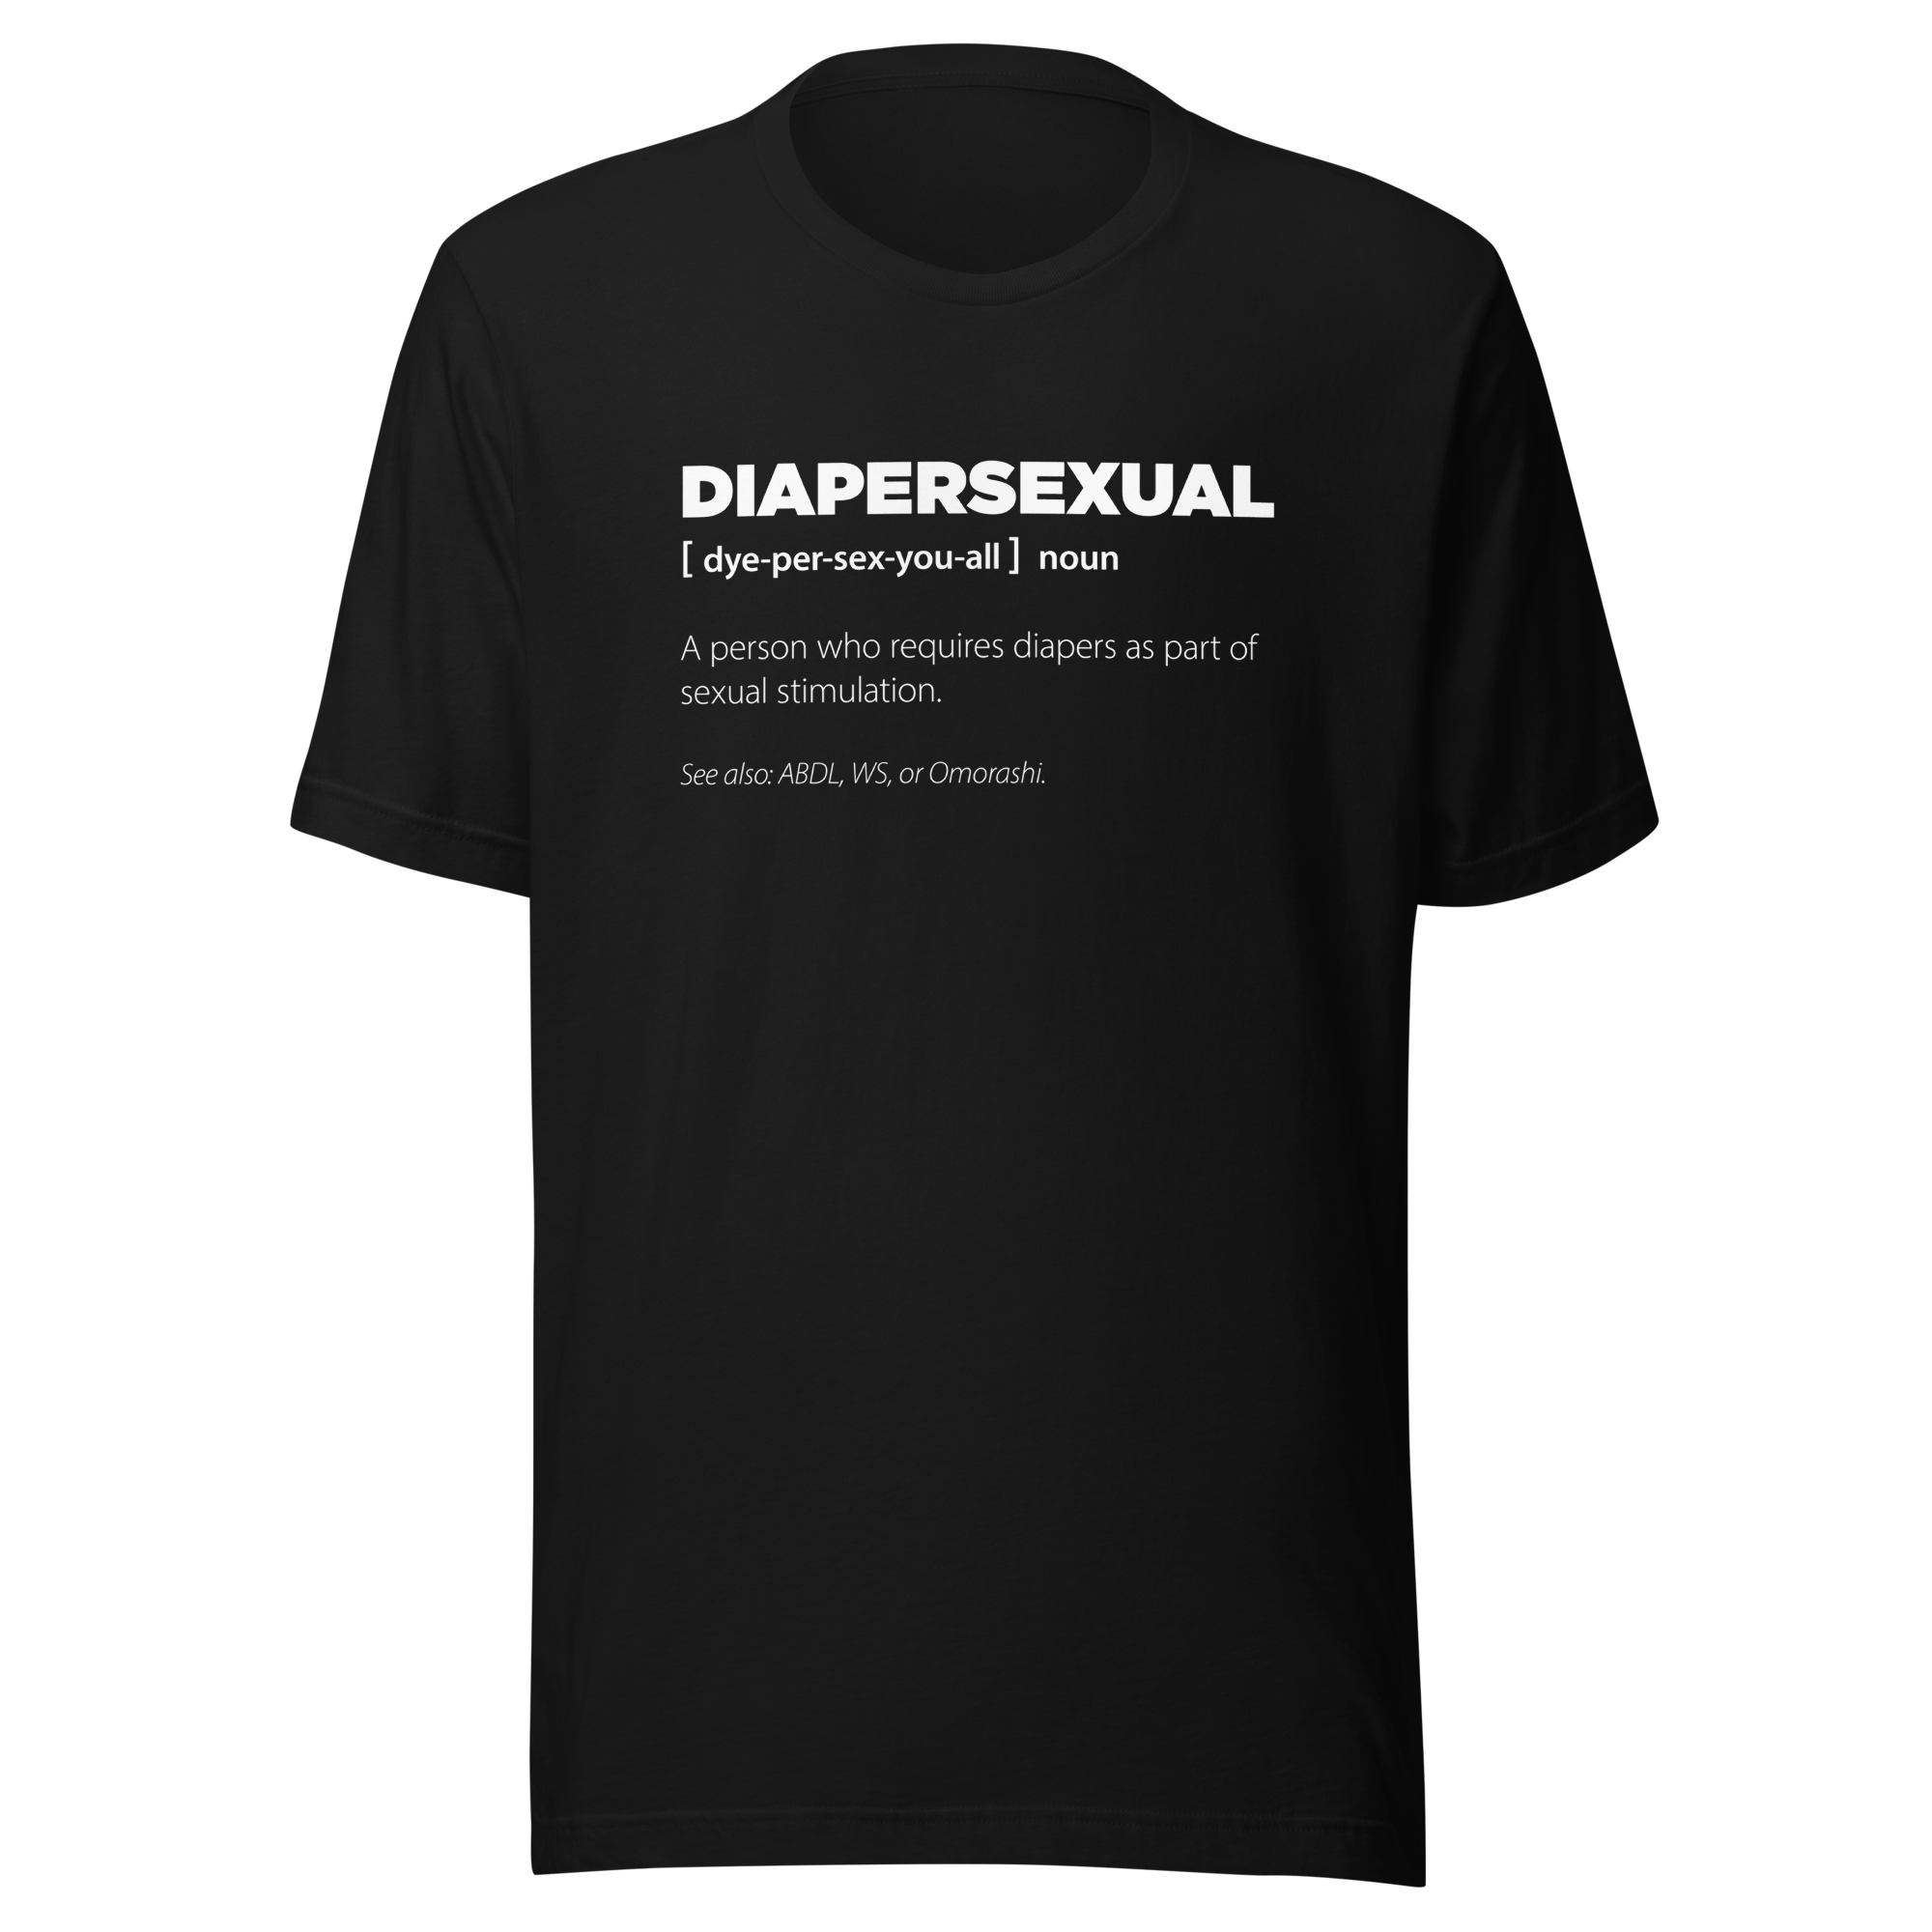 Diapersexual - T-shirt - Lifestyle ABDL